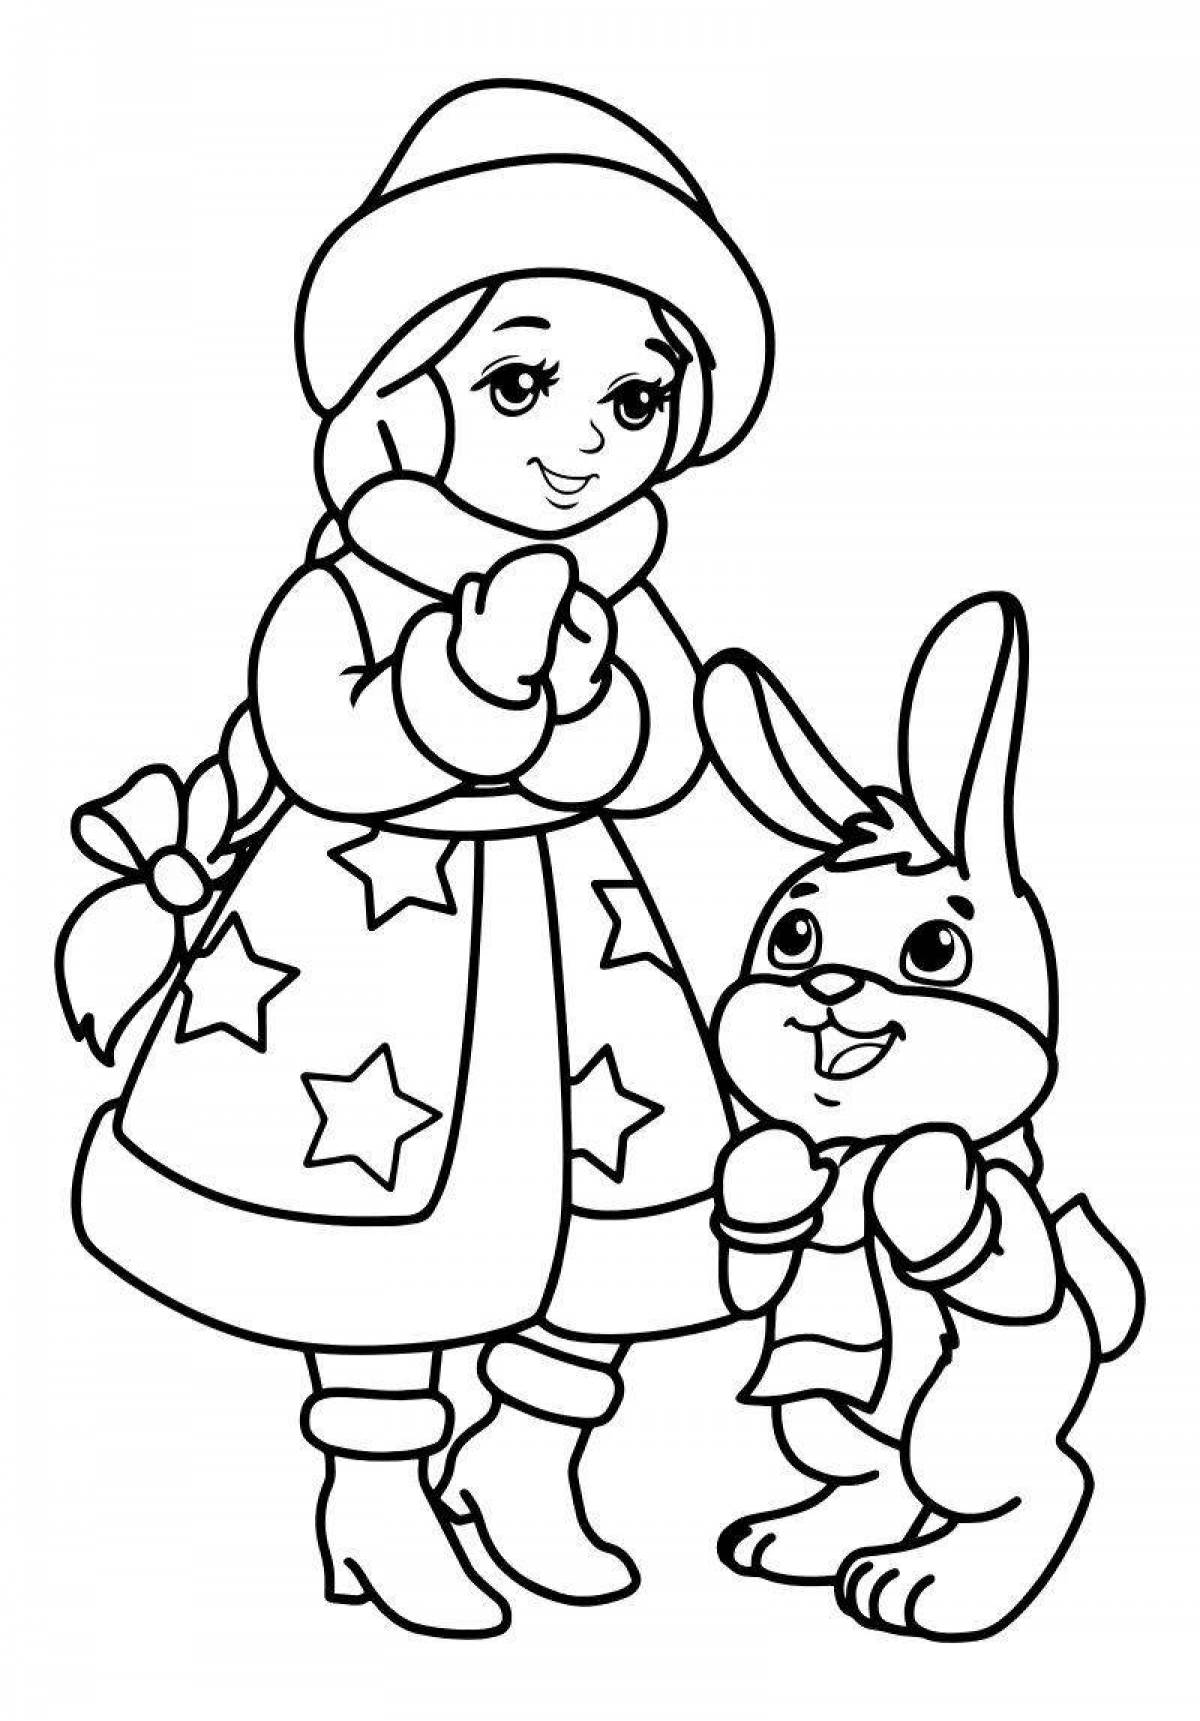 Coloring book sparkling New Year's Snow Maiden